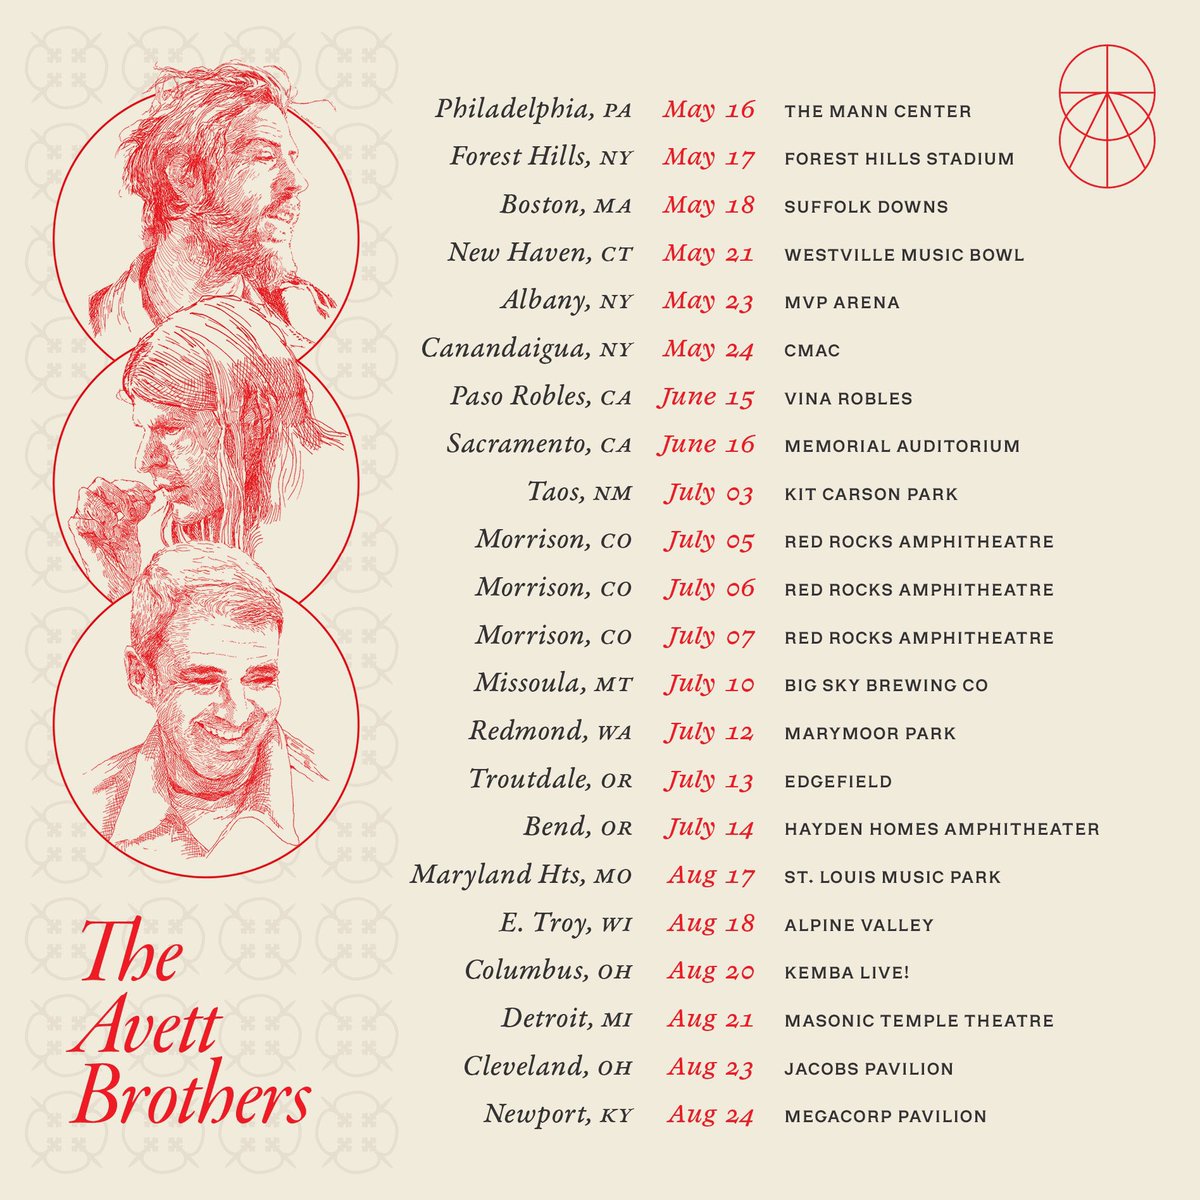 JUST ANNOUNCED - Spring/Summer Tour! Shows and more info at theavettbrothers.com/tour.